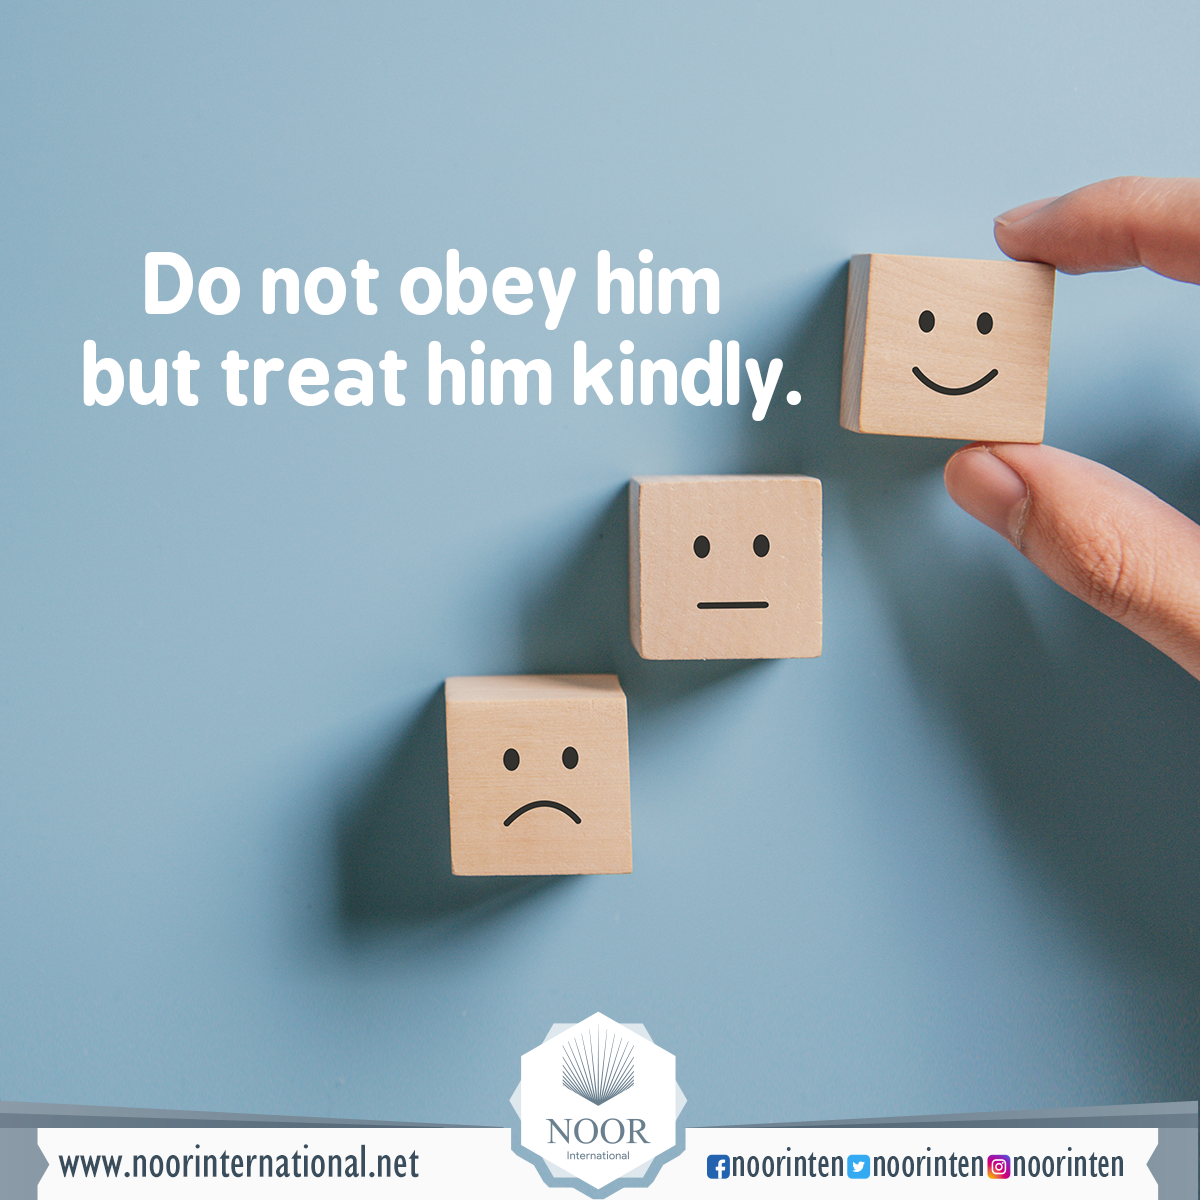 Do not obey him but treat him kindly.